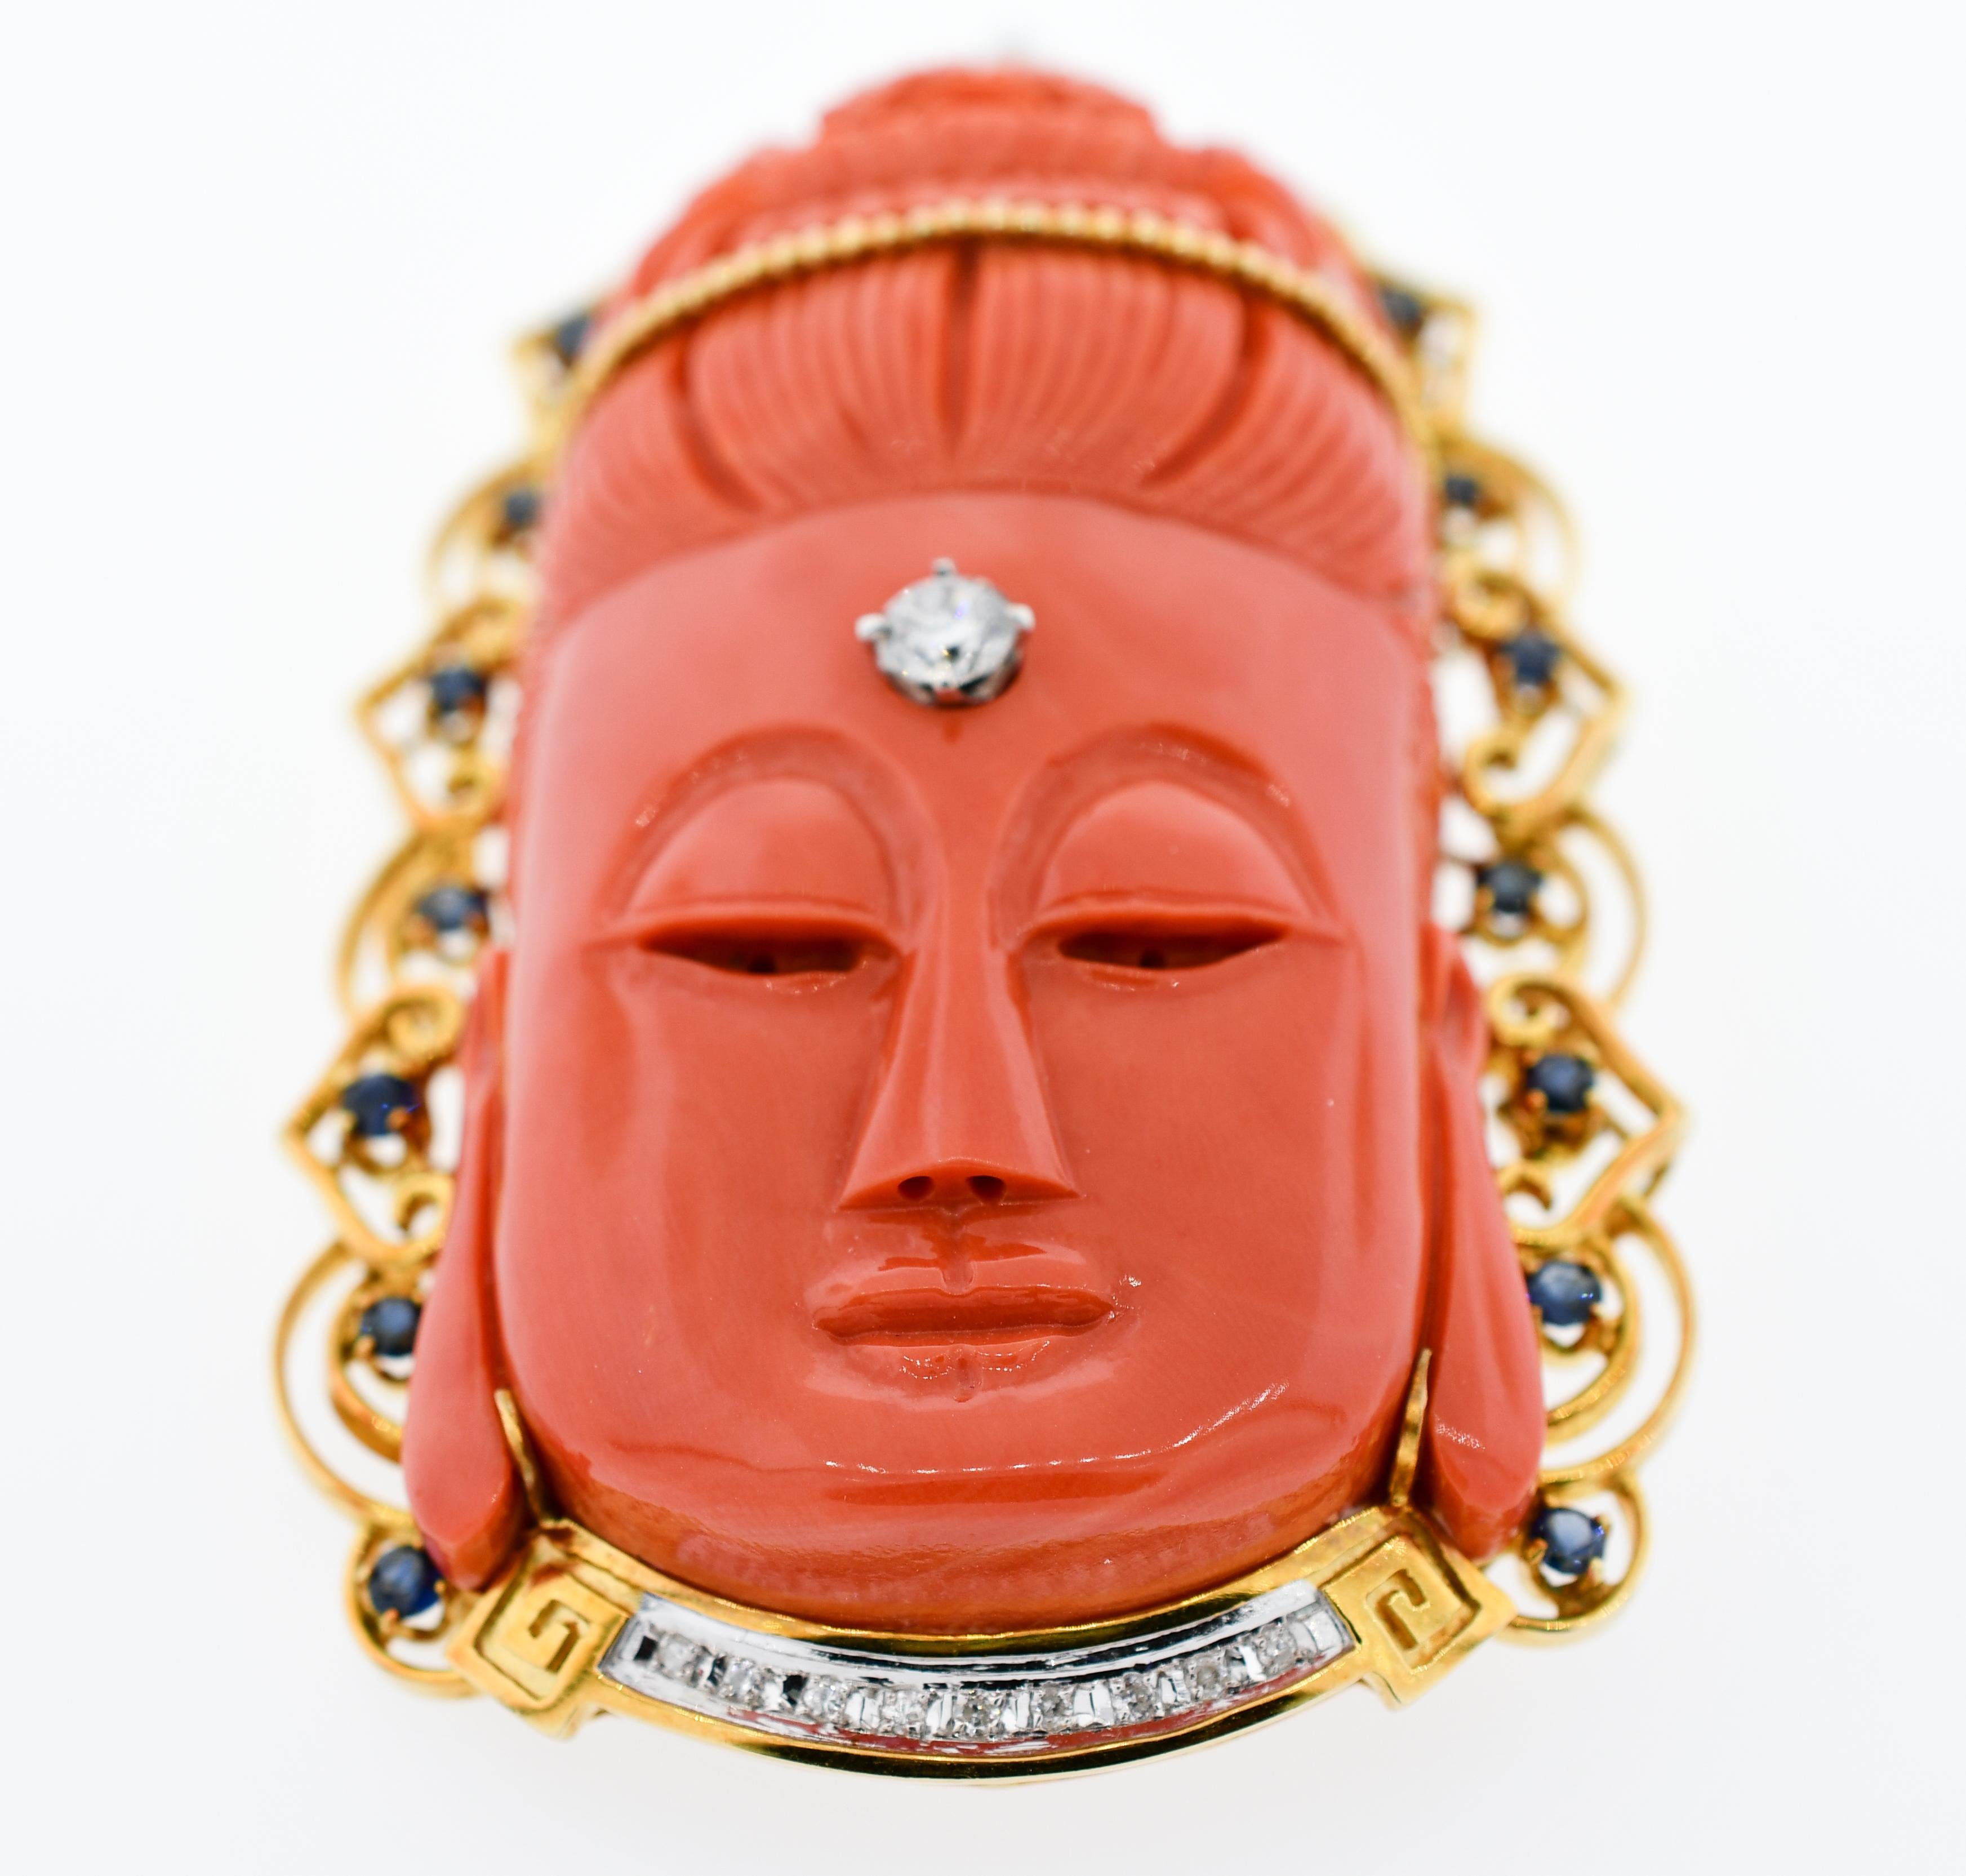 Absolutely stunning color and vitreous shine, beautifully detailed hand carved coral.  The Buddah is framed with a 14 karat yellow gold decorative fringe which is accented by nineteen (19) round blue sapphires and sixteen (16) round brilliant cut